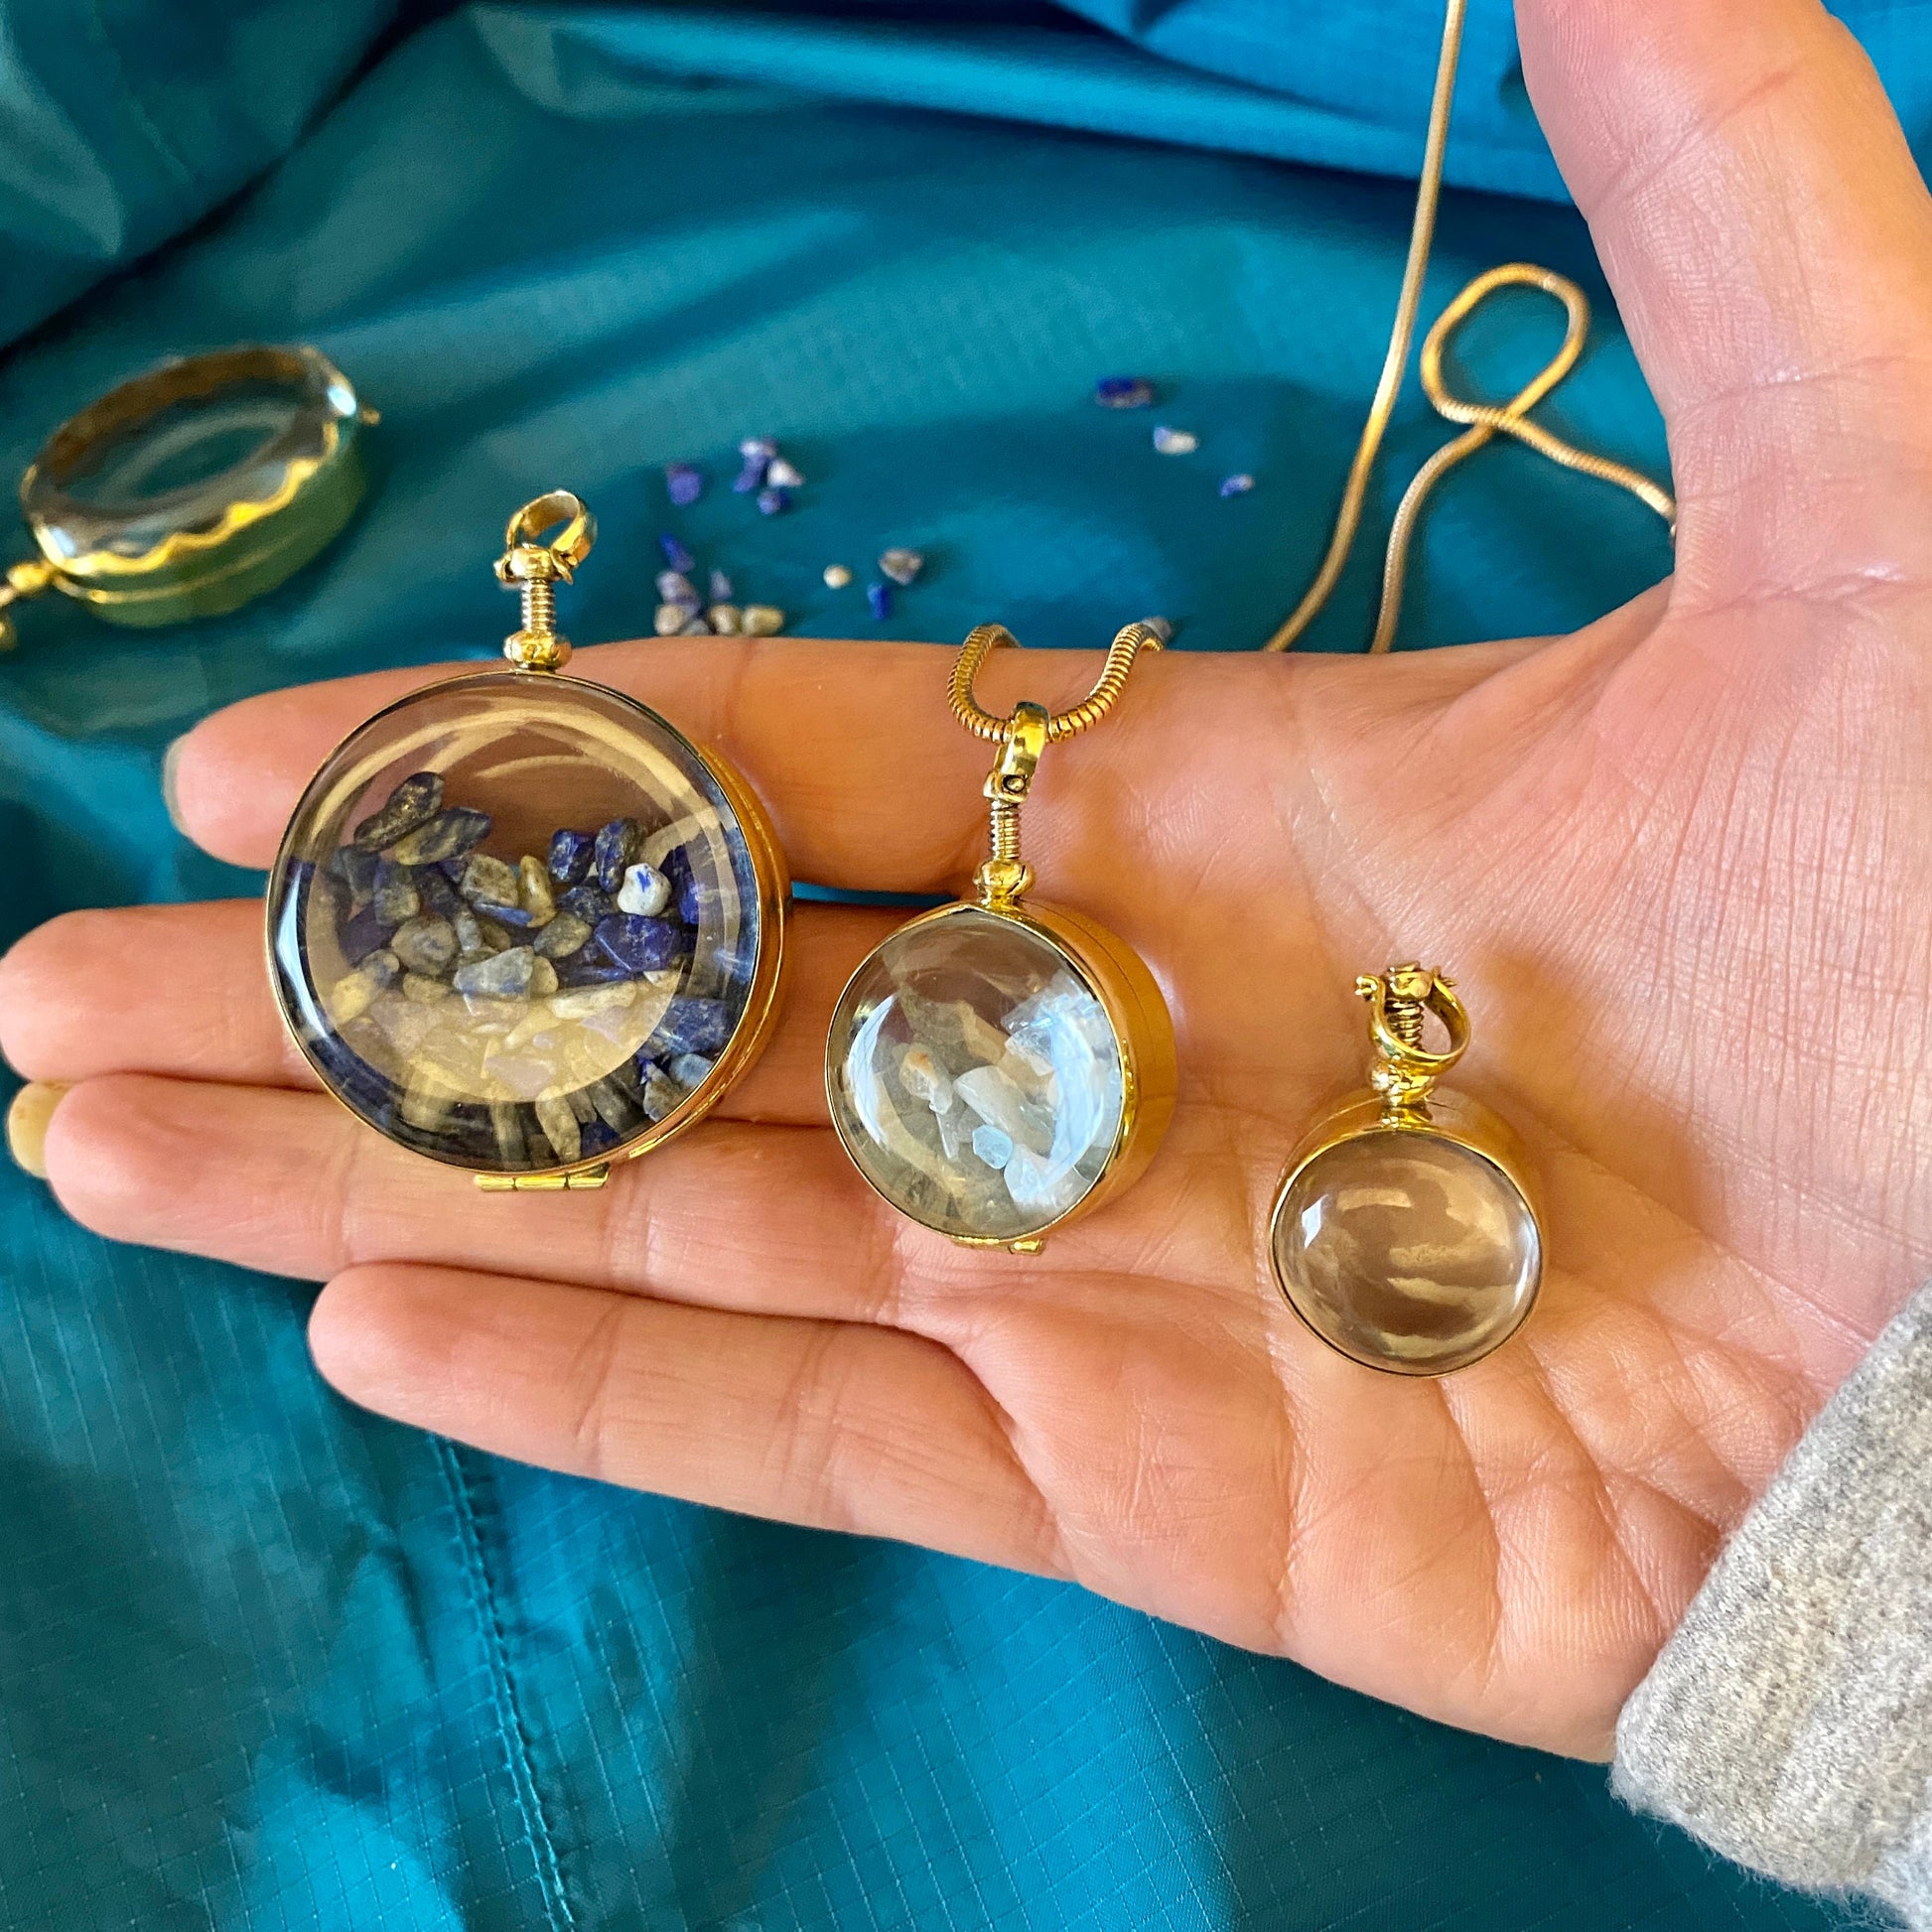 Gold Lockets Necklace with Birthstones - Gold Plated Locket Necklace - Personalized Gold Locket Necklace - Custom Gold Locket With Photo